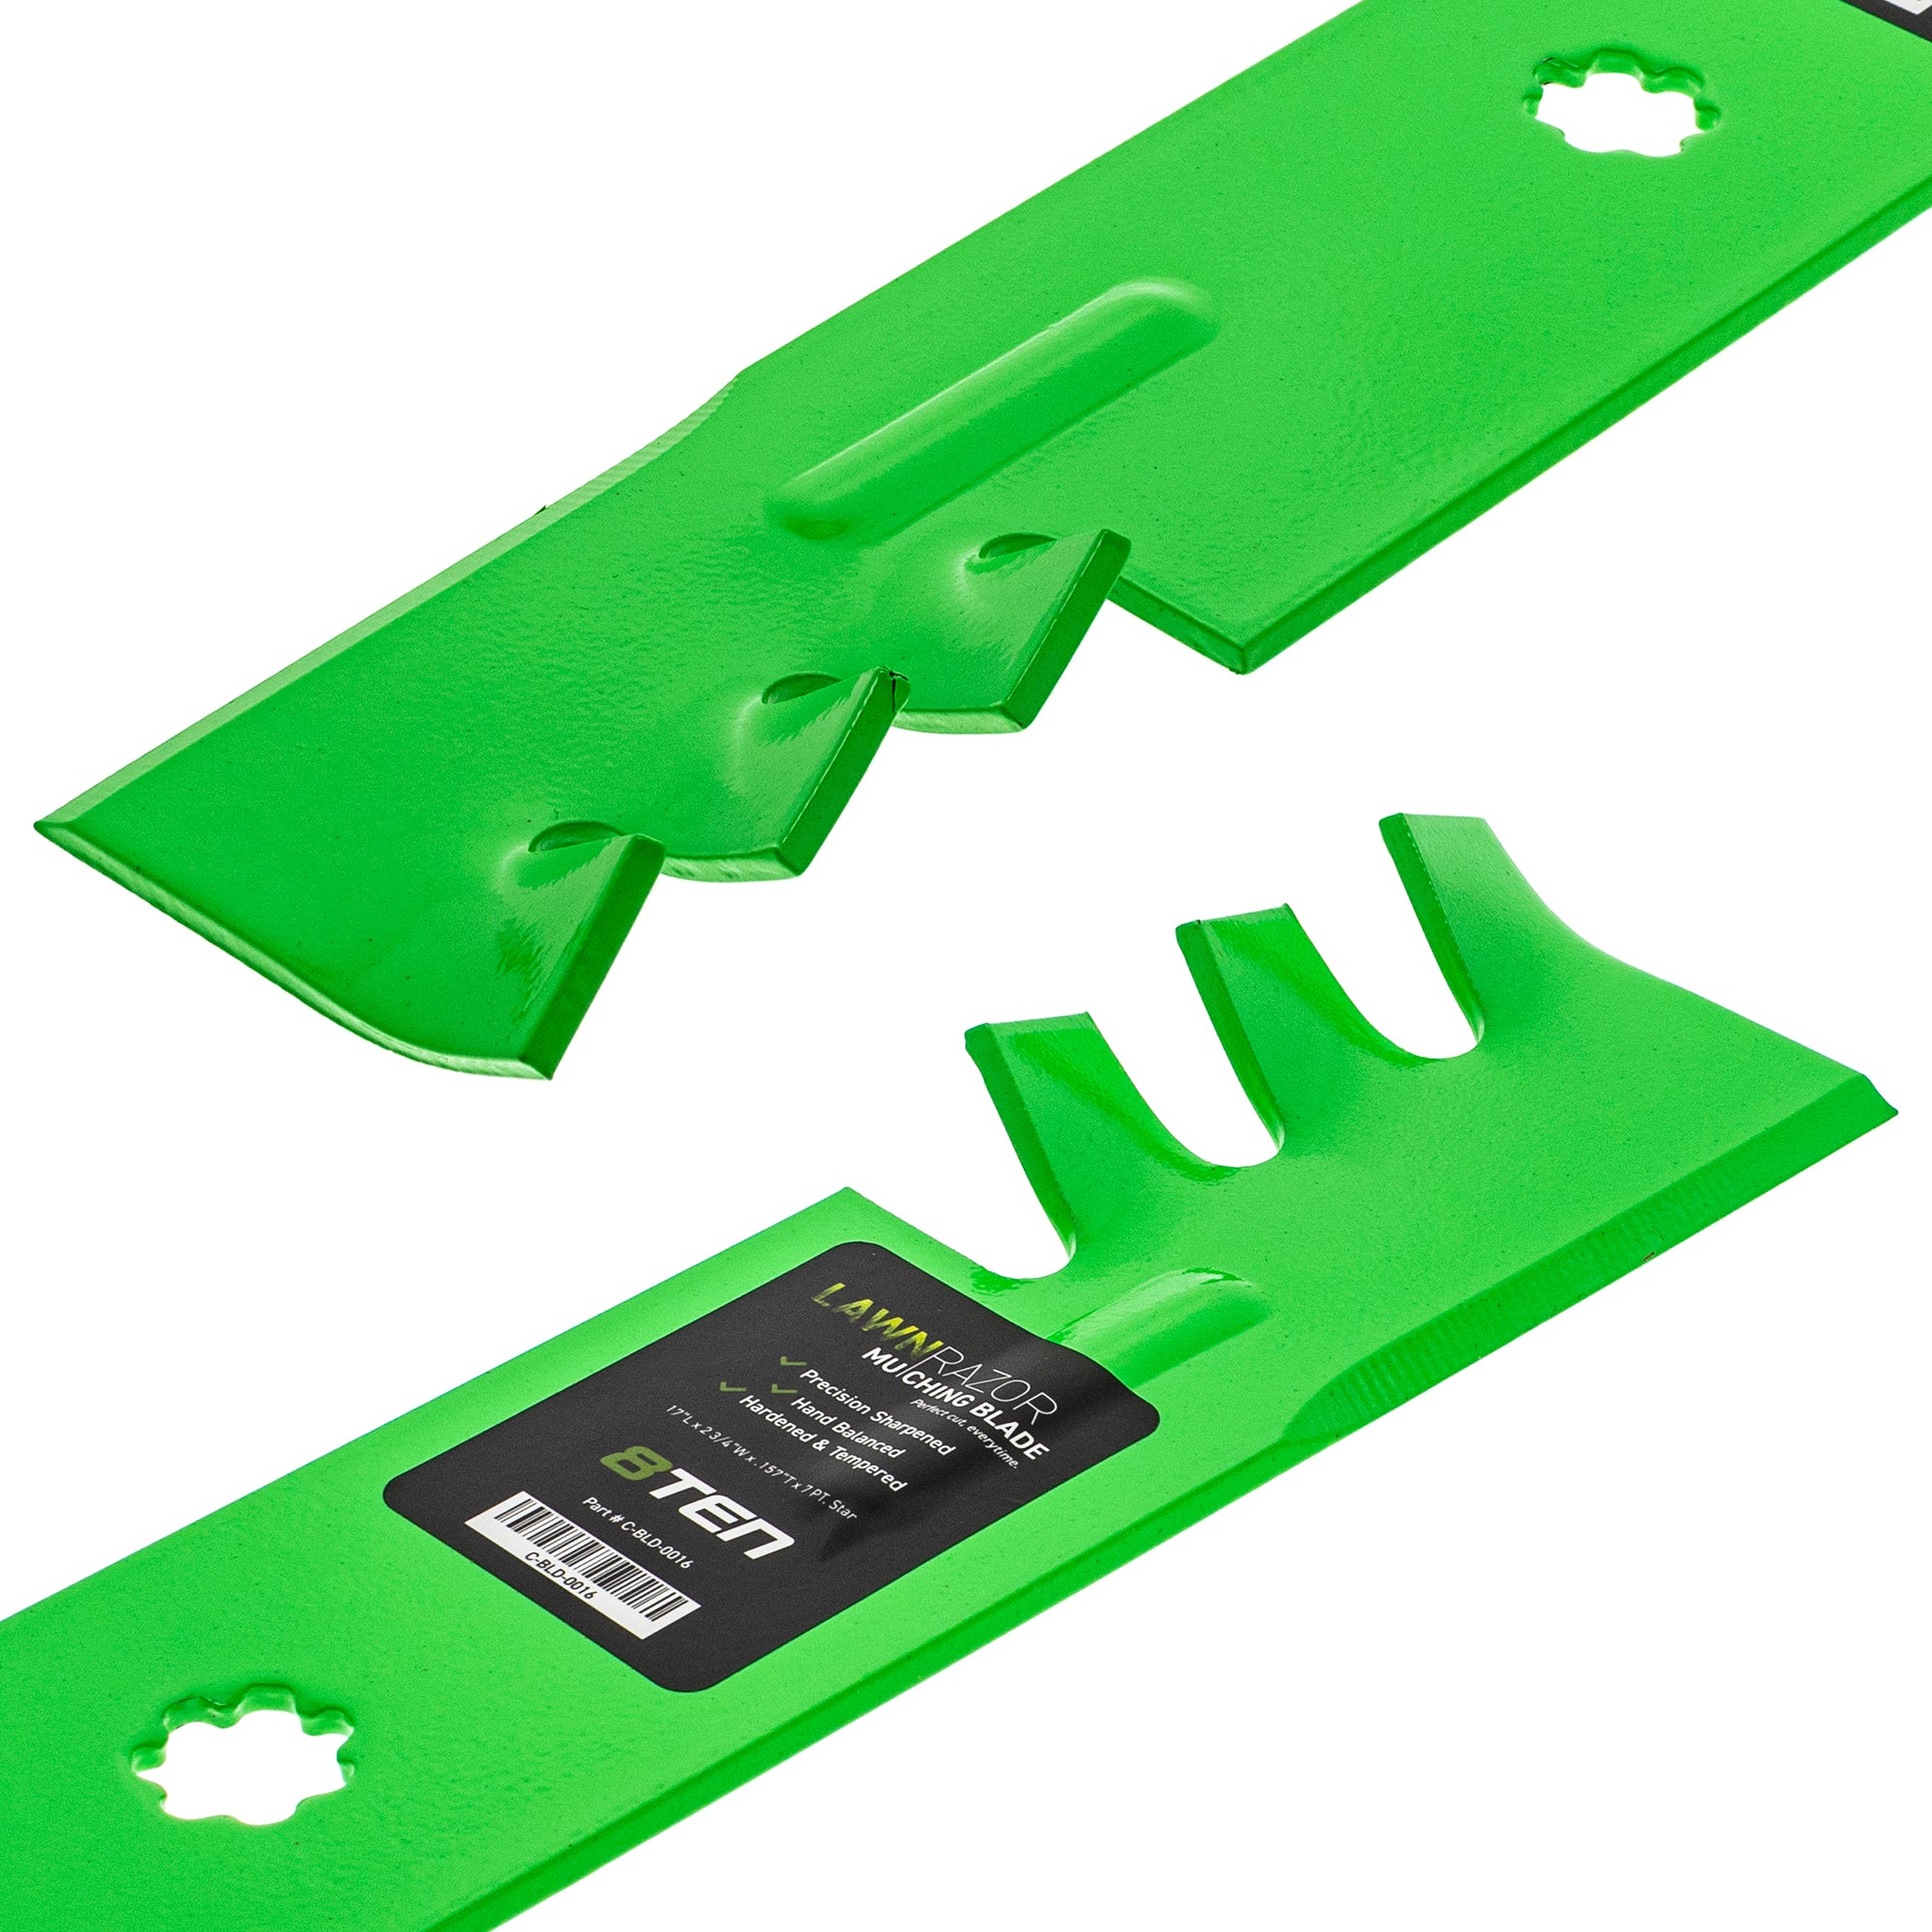 LawnRAZOR Blade Set for John Deere AM141035 GX21784 GX21786 Toothed